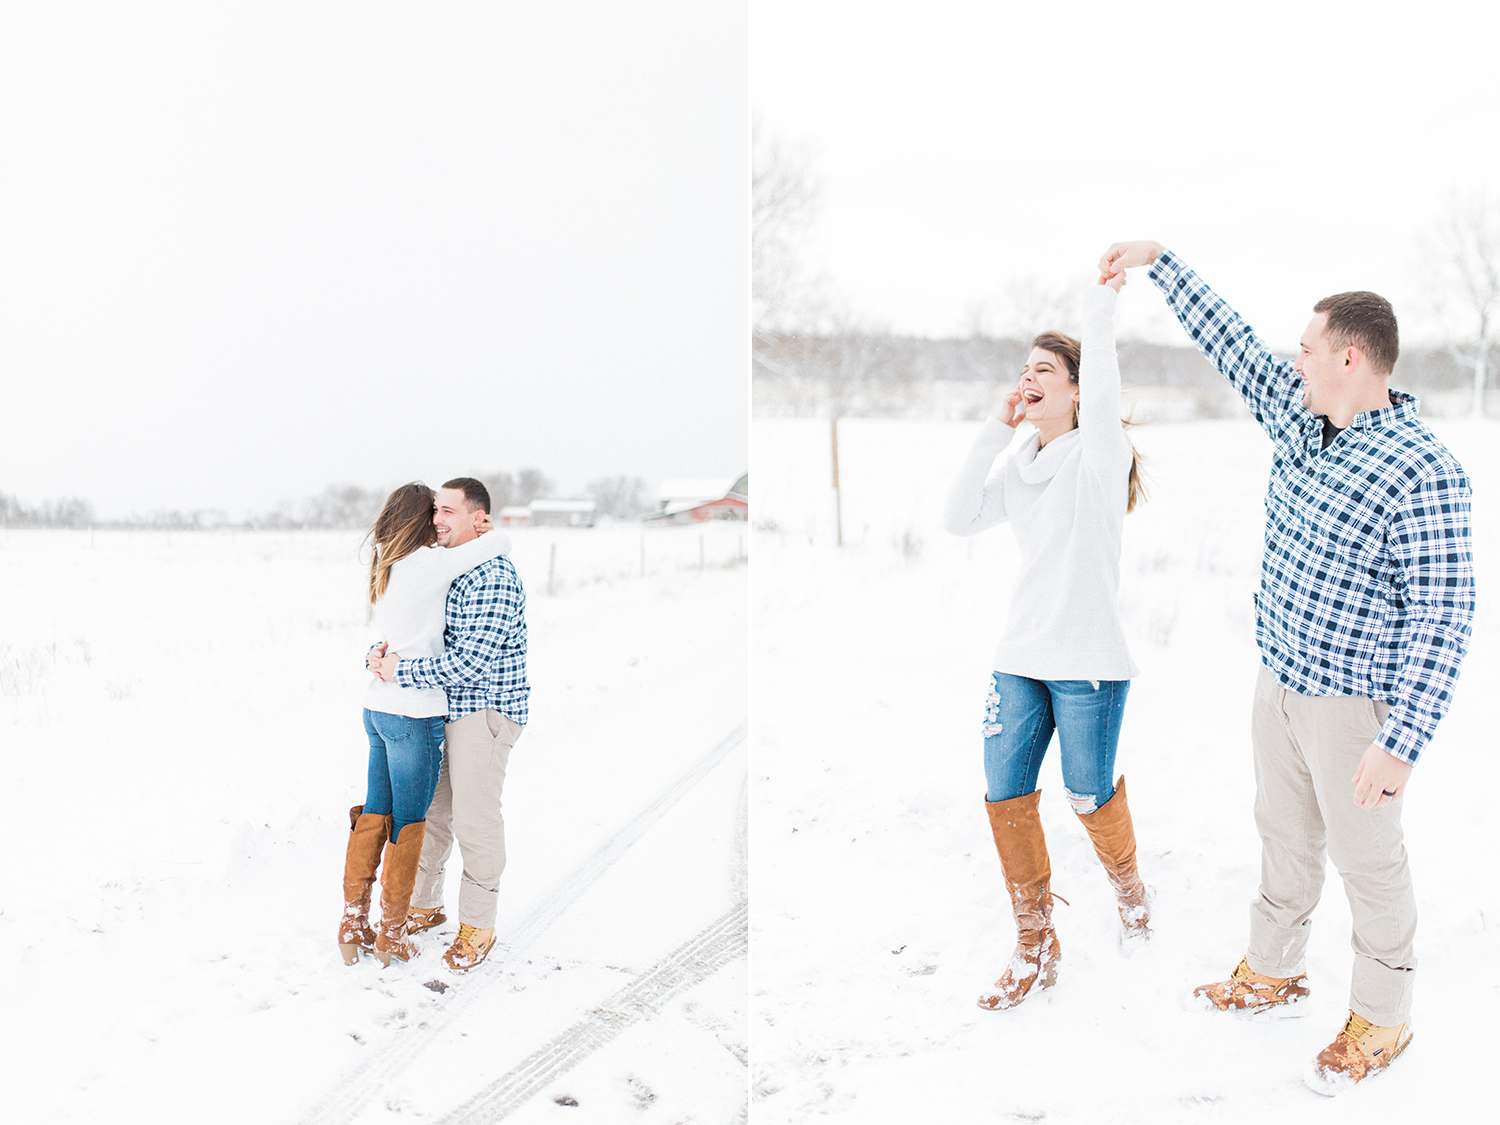 Snowy day couples photography in northern Virginia